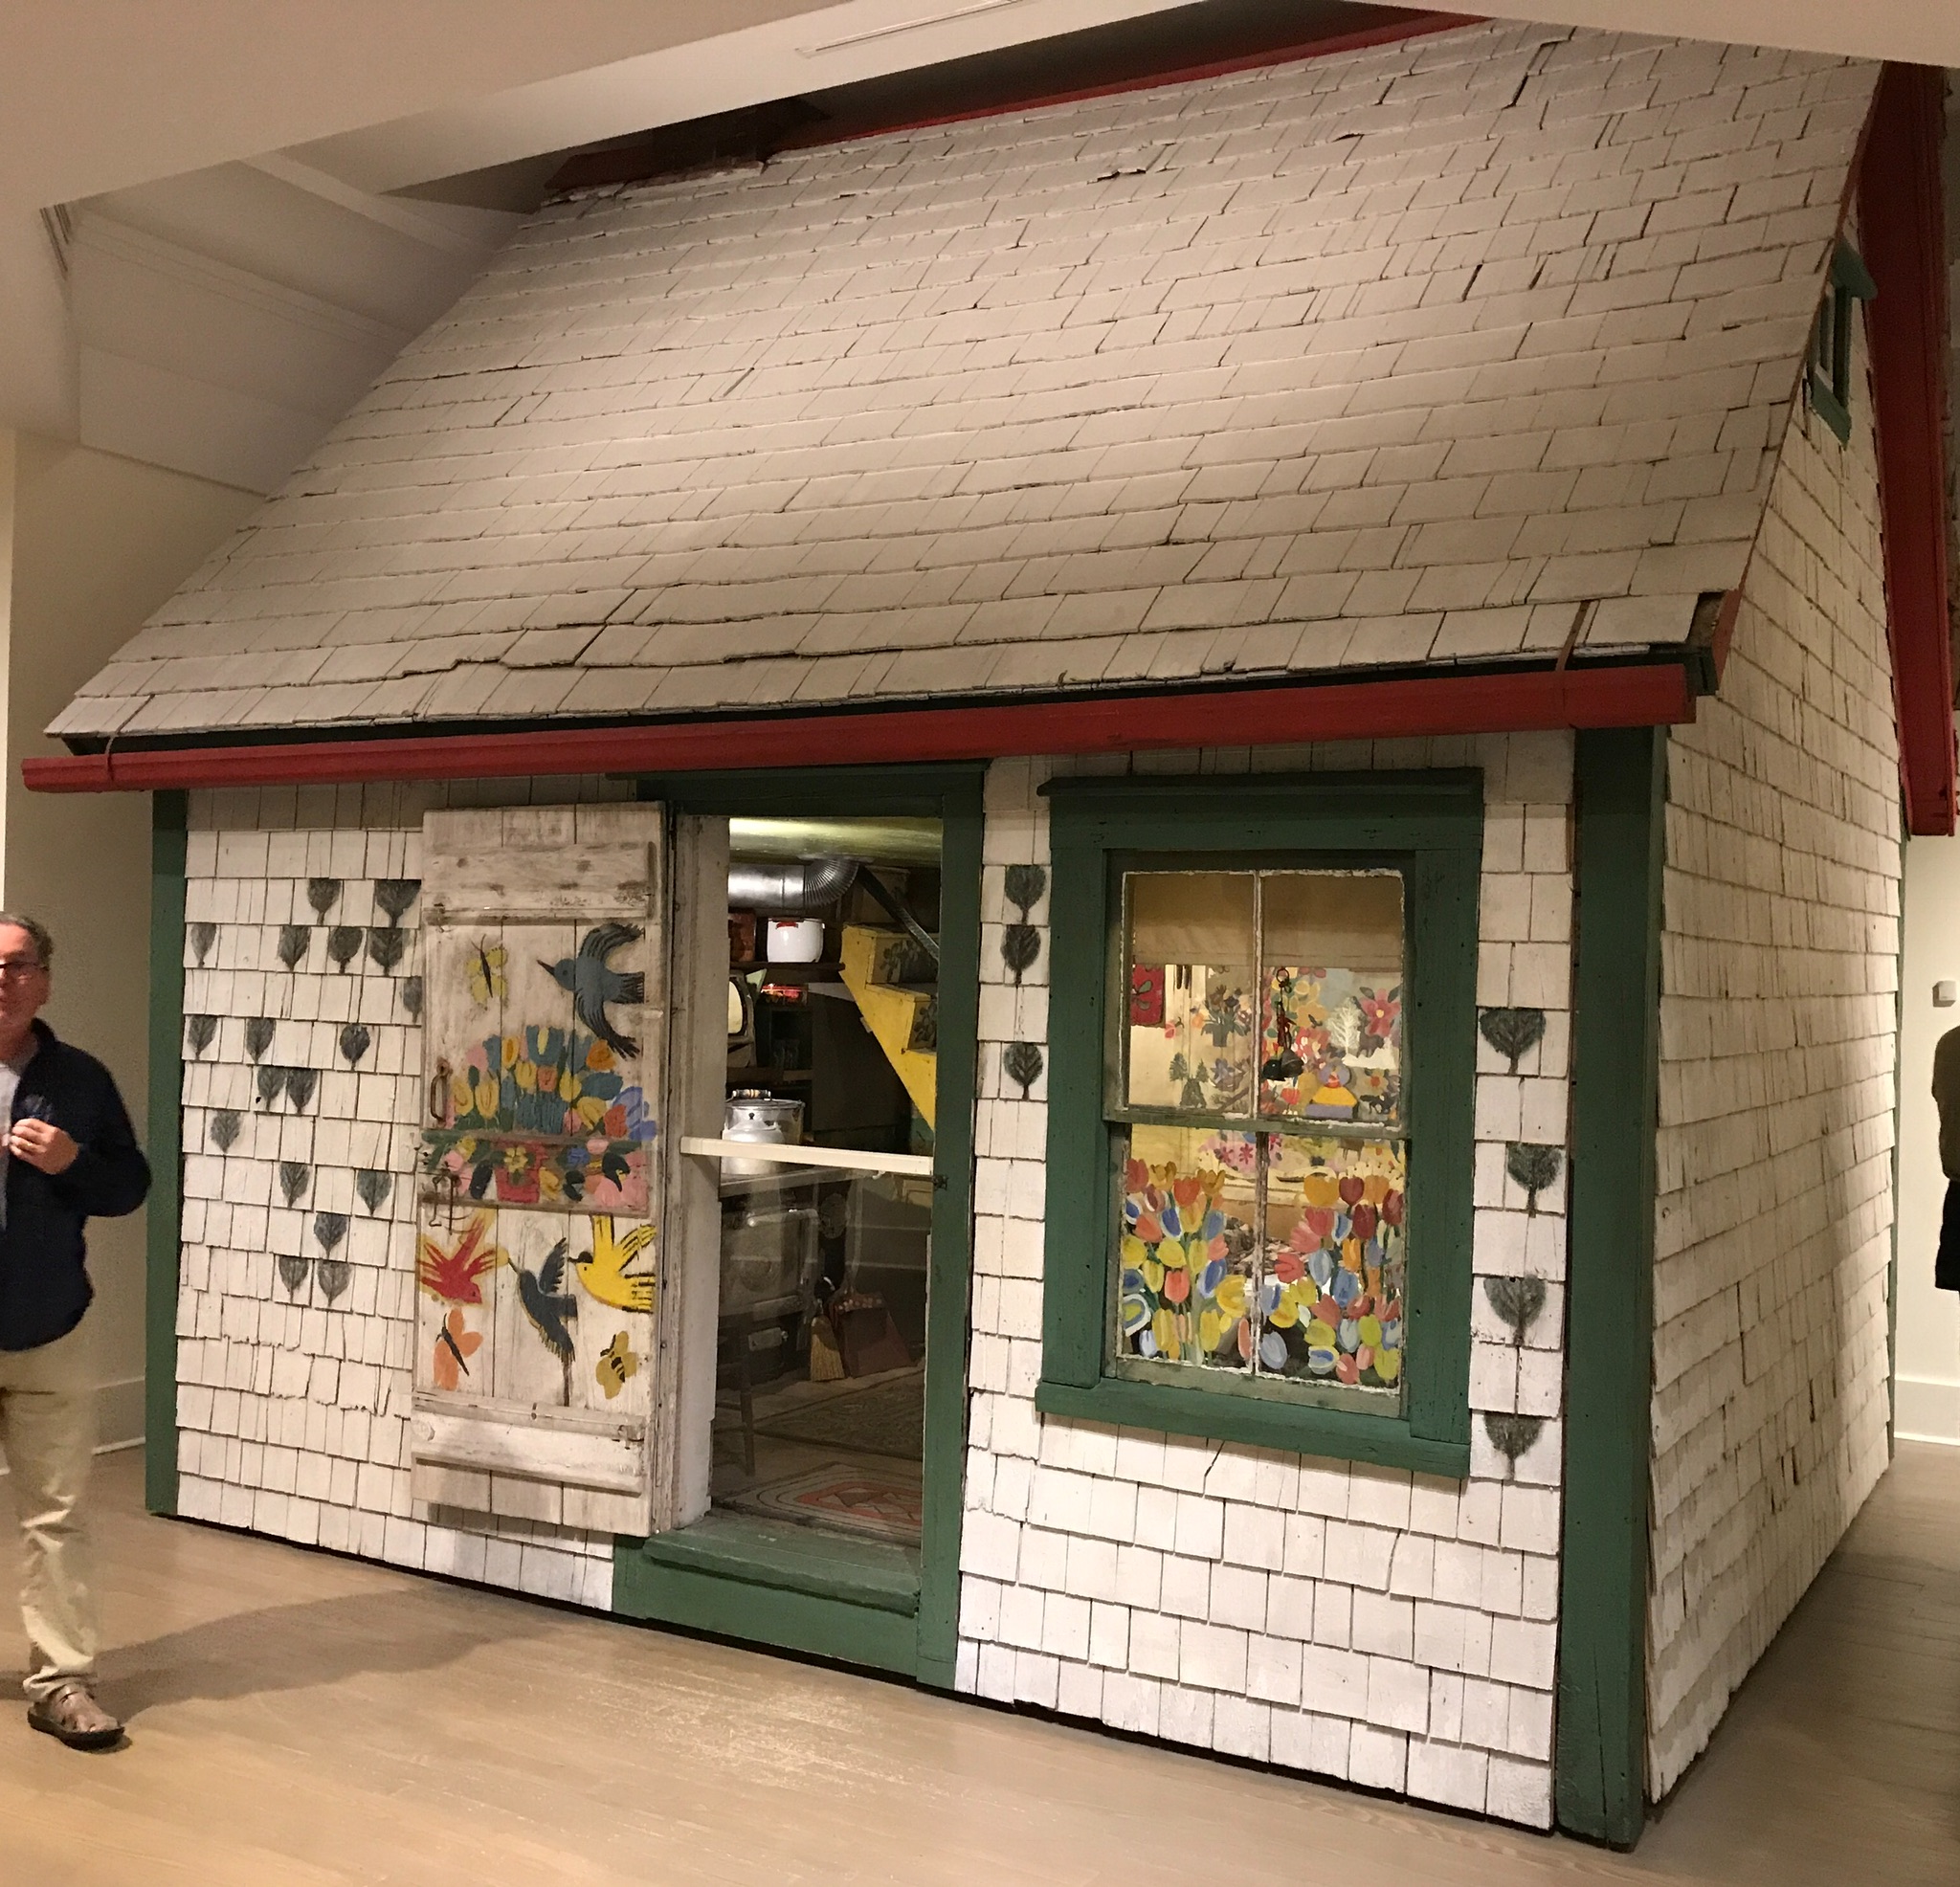 The Maud Lewis House